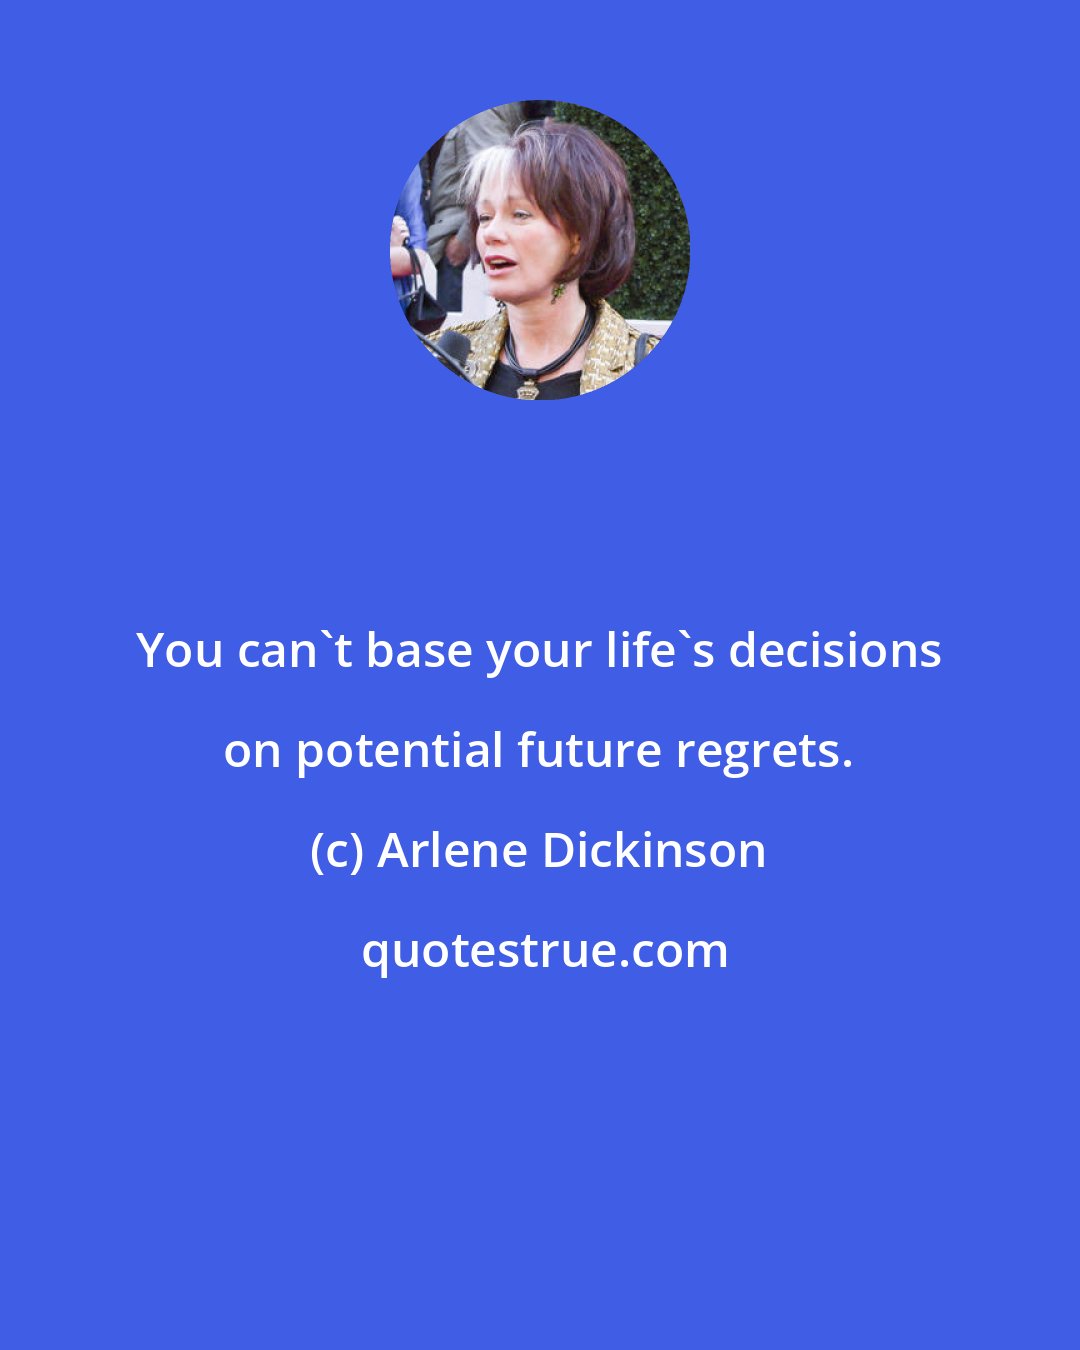 Arlene Dickinson: You can't base your life's decisions on potential future regrets.